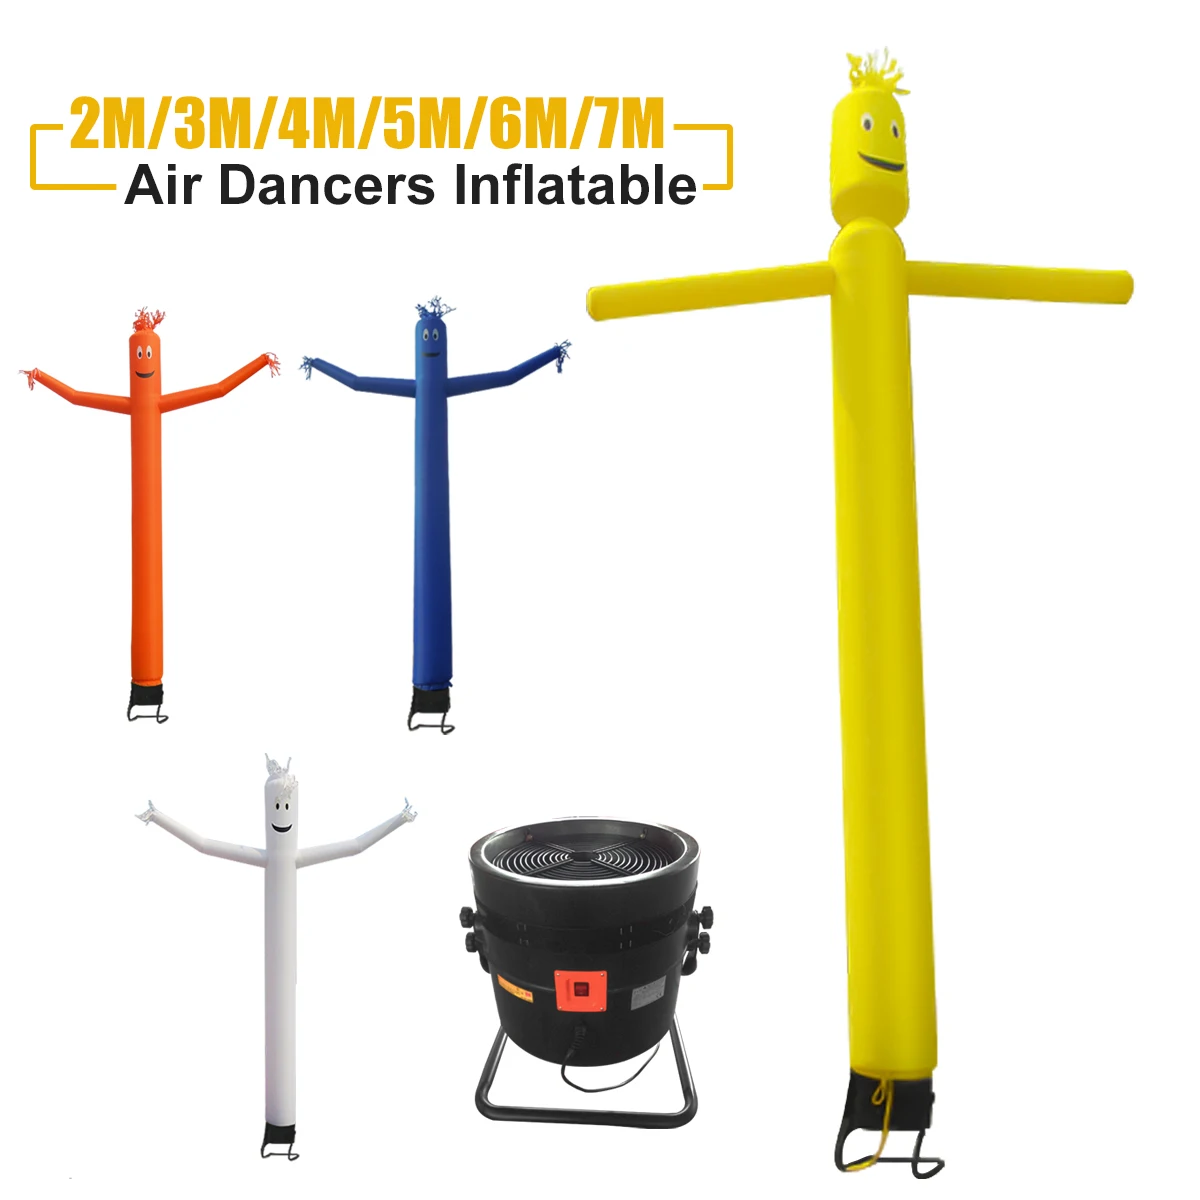 

2m/3m/4m/5m/6m/7m Inflatable Tube Man Air Dancers Advertising House Sign Walker Fly Air Sky Dancing Waving Puppet With Blower